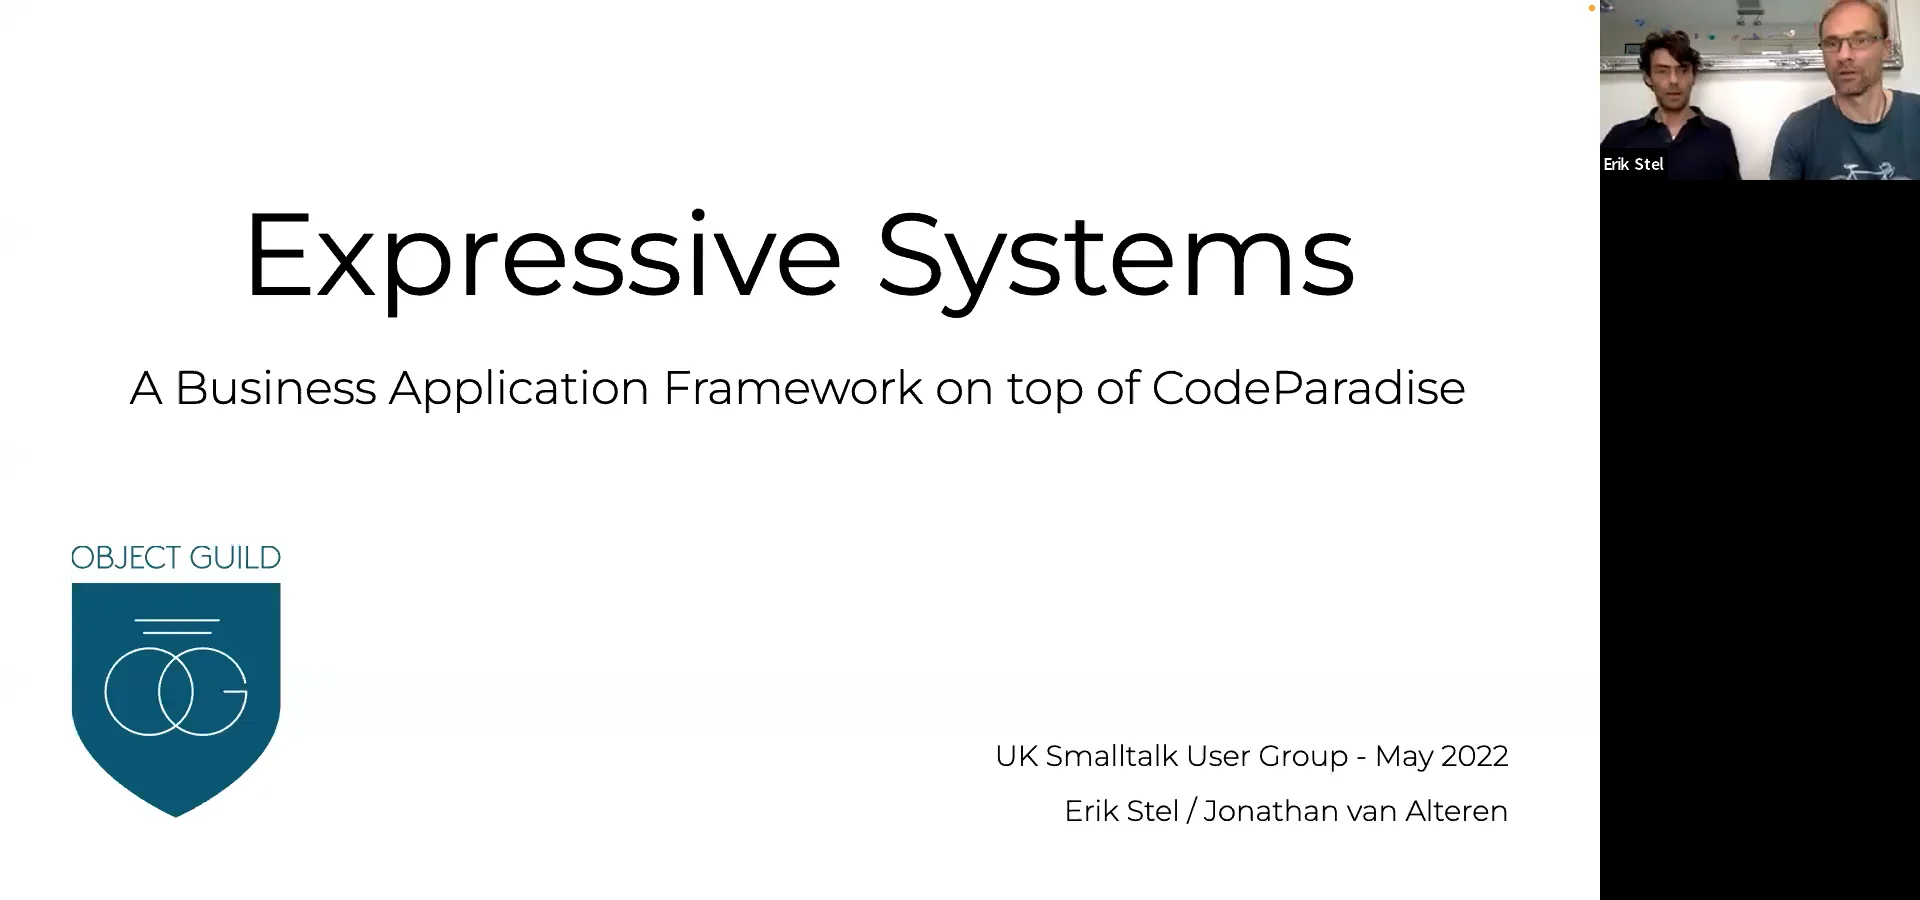 Expressive Systems: A business application framework on top of CodeParadise